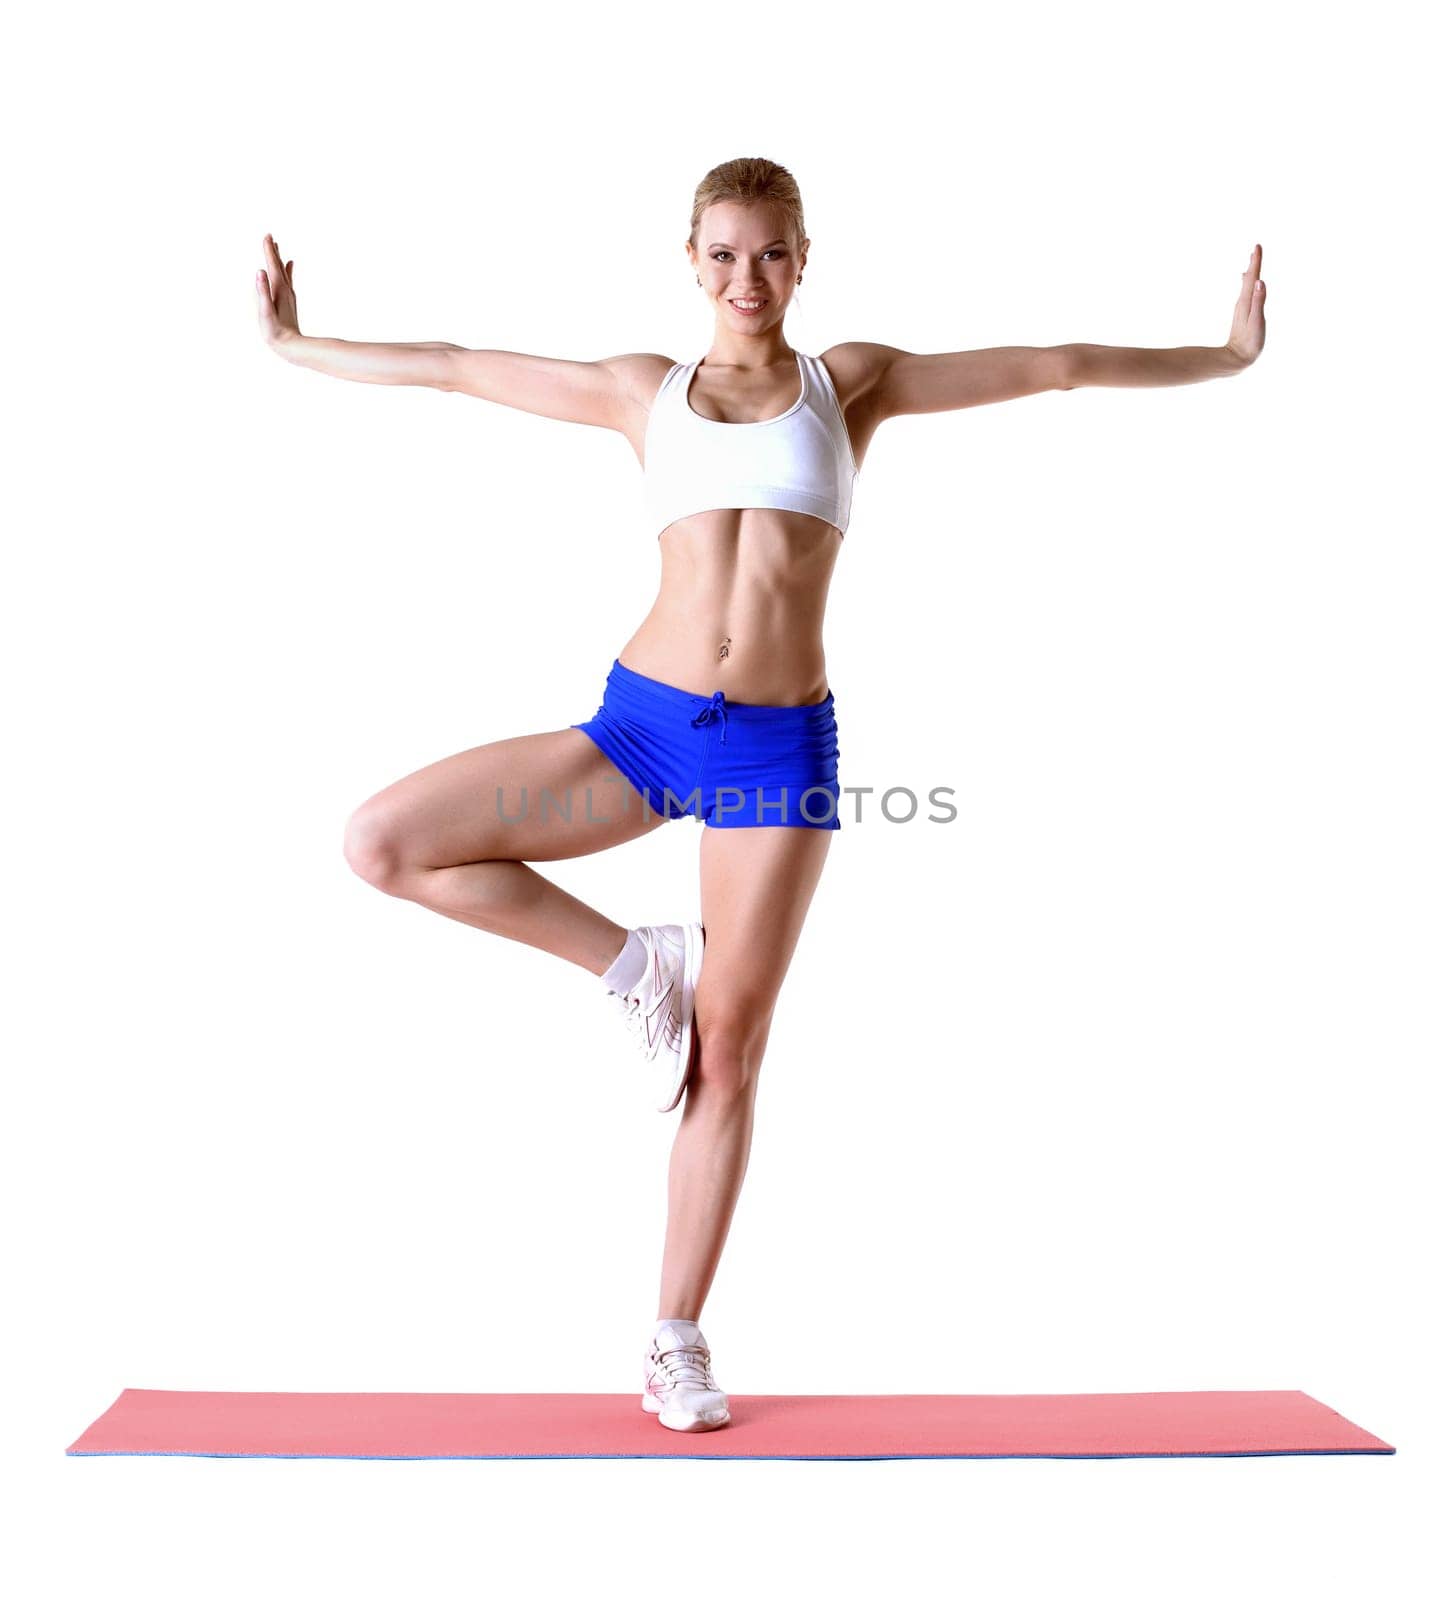 Attractive blonde posing on mat in studio, isolated over white background